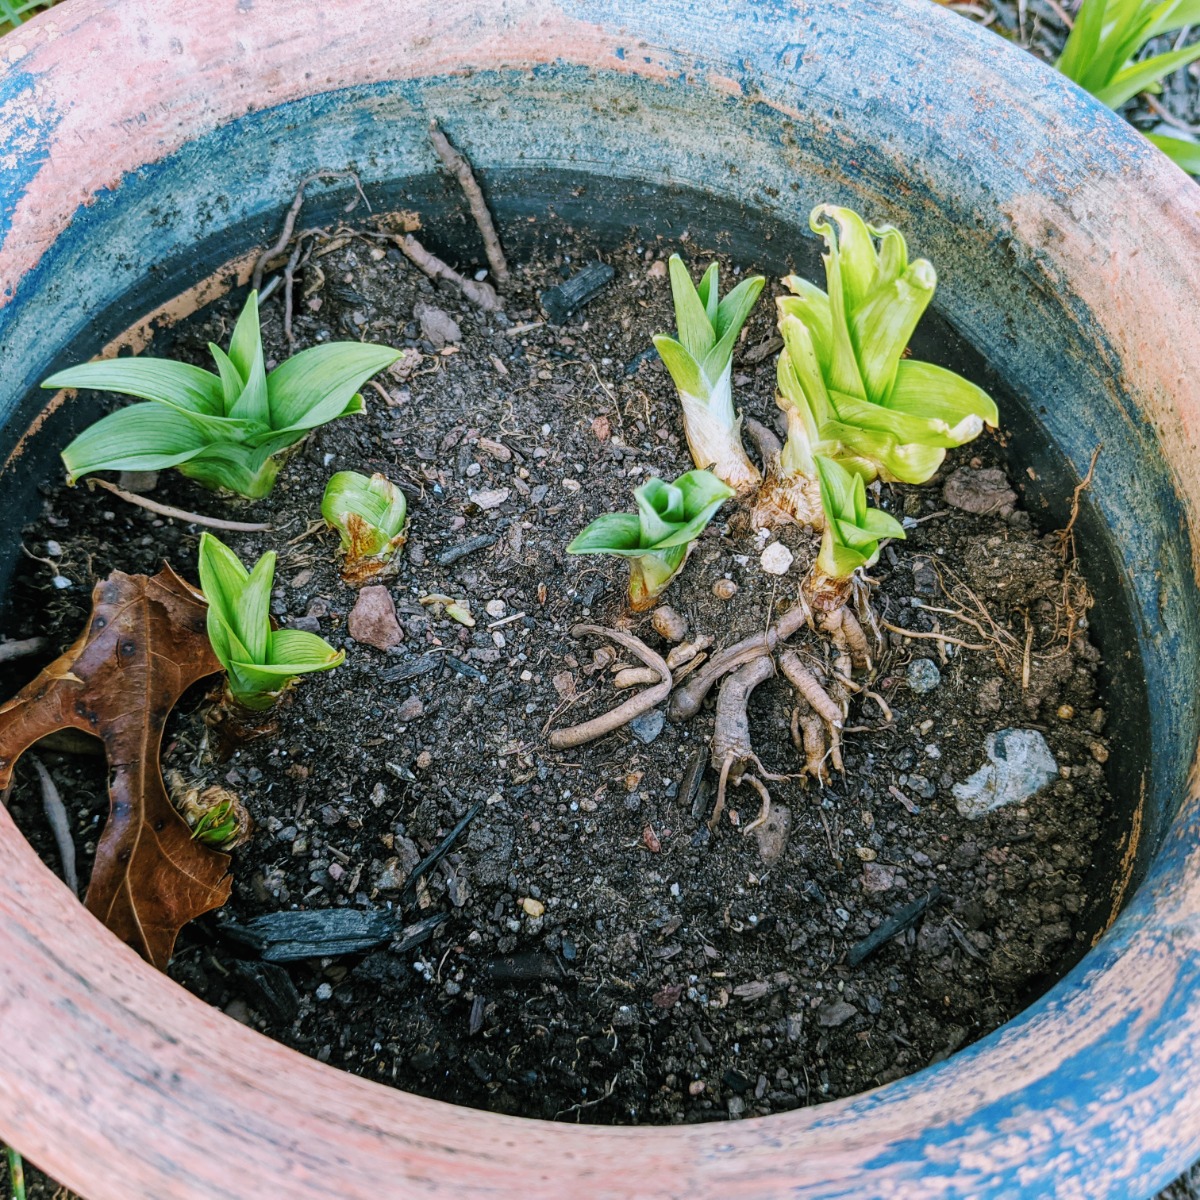 Transplanting Daylilies in Pots when dividing tubers and daylily plants